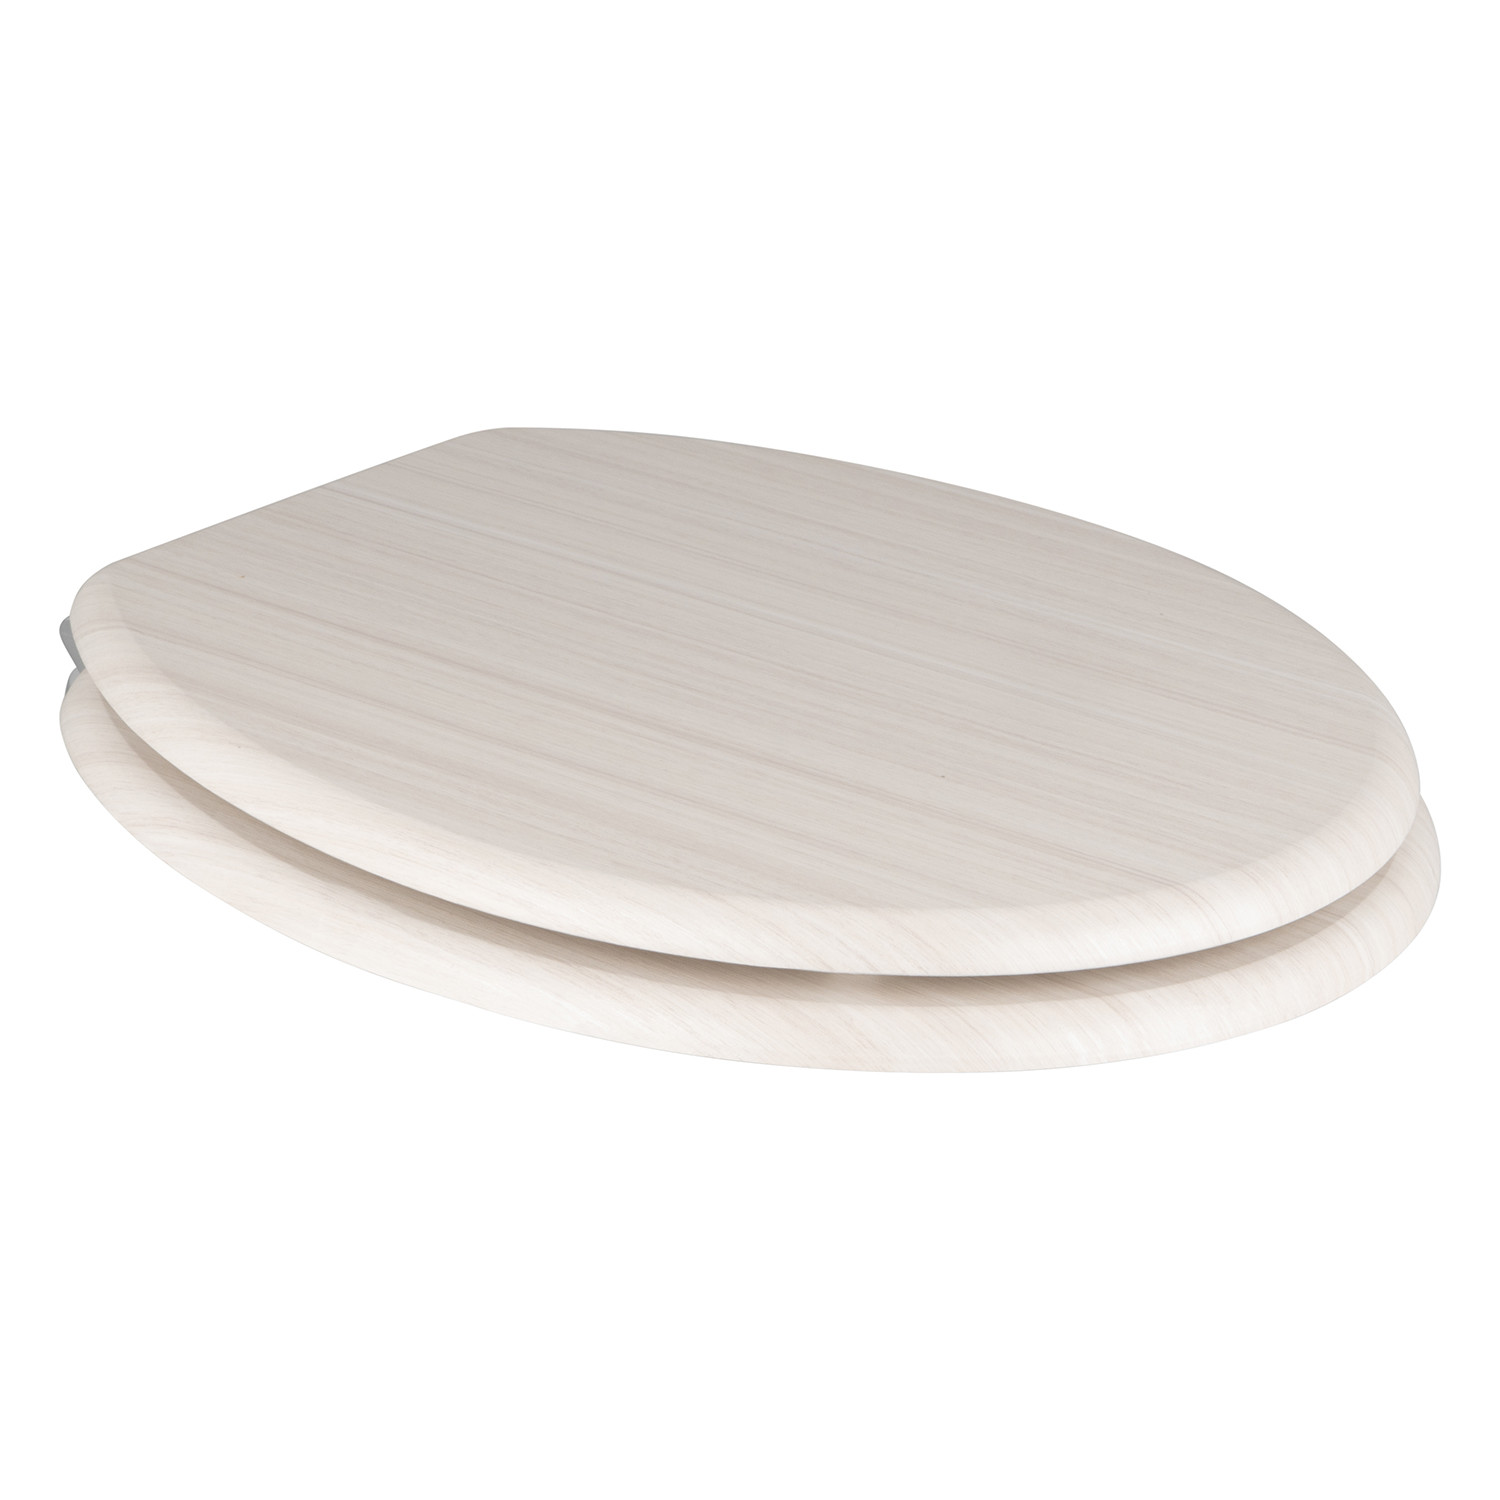 Wooden Effect Toilet Seat - Raw Wood Image 1